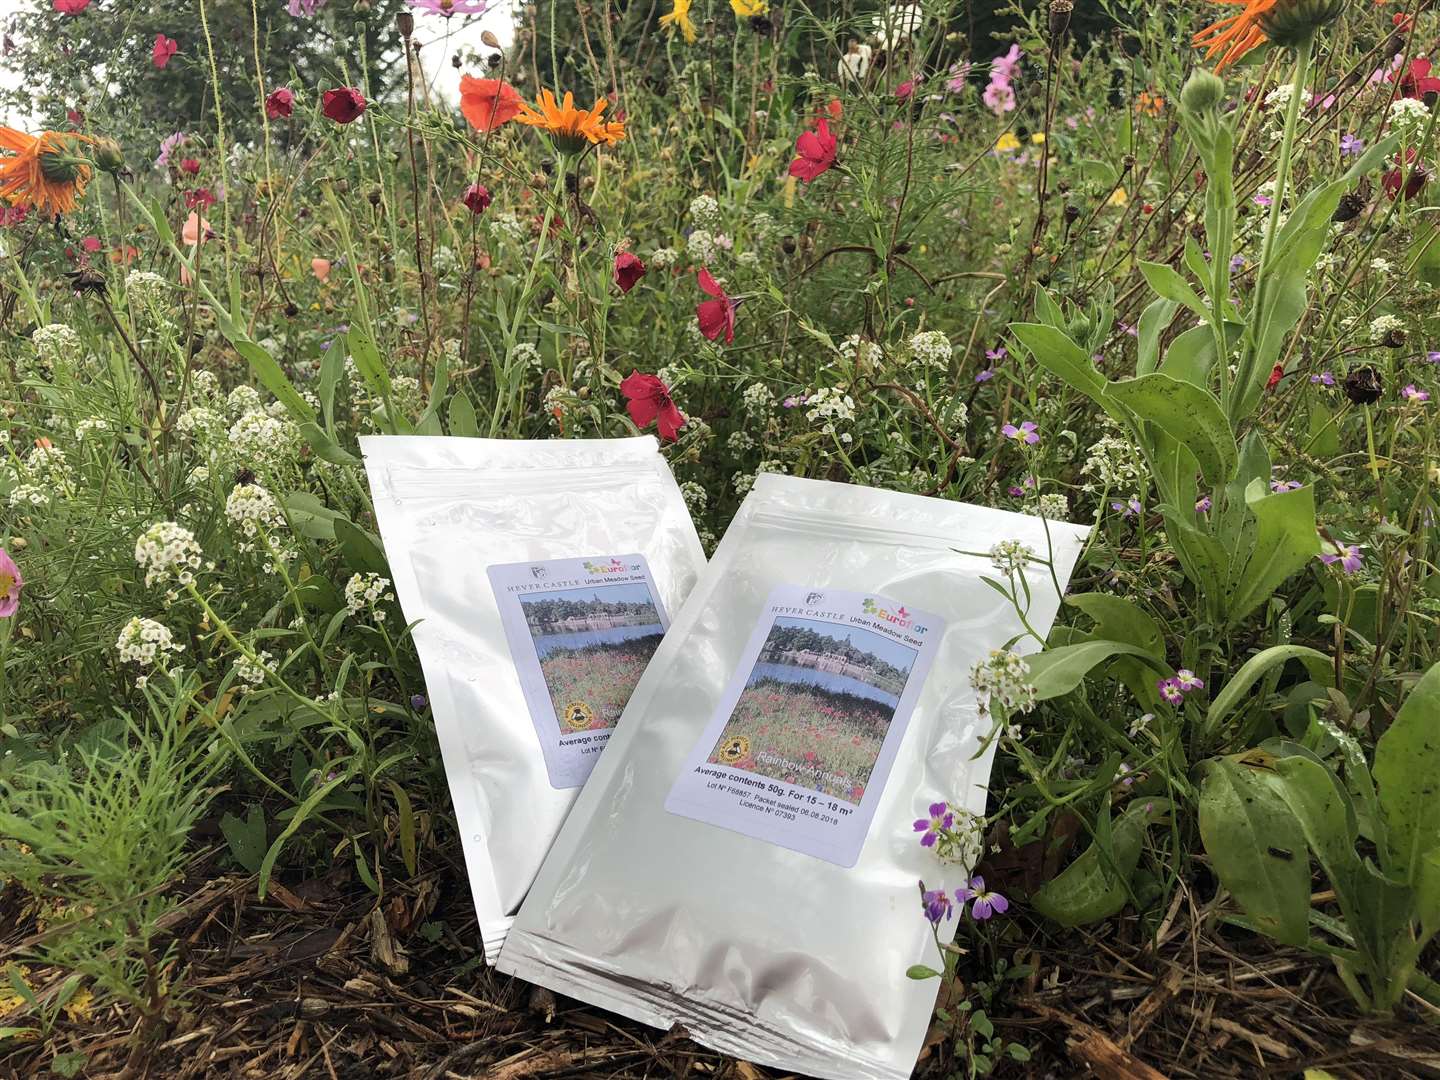 Seed mixes are available from the courtyard shop